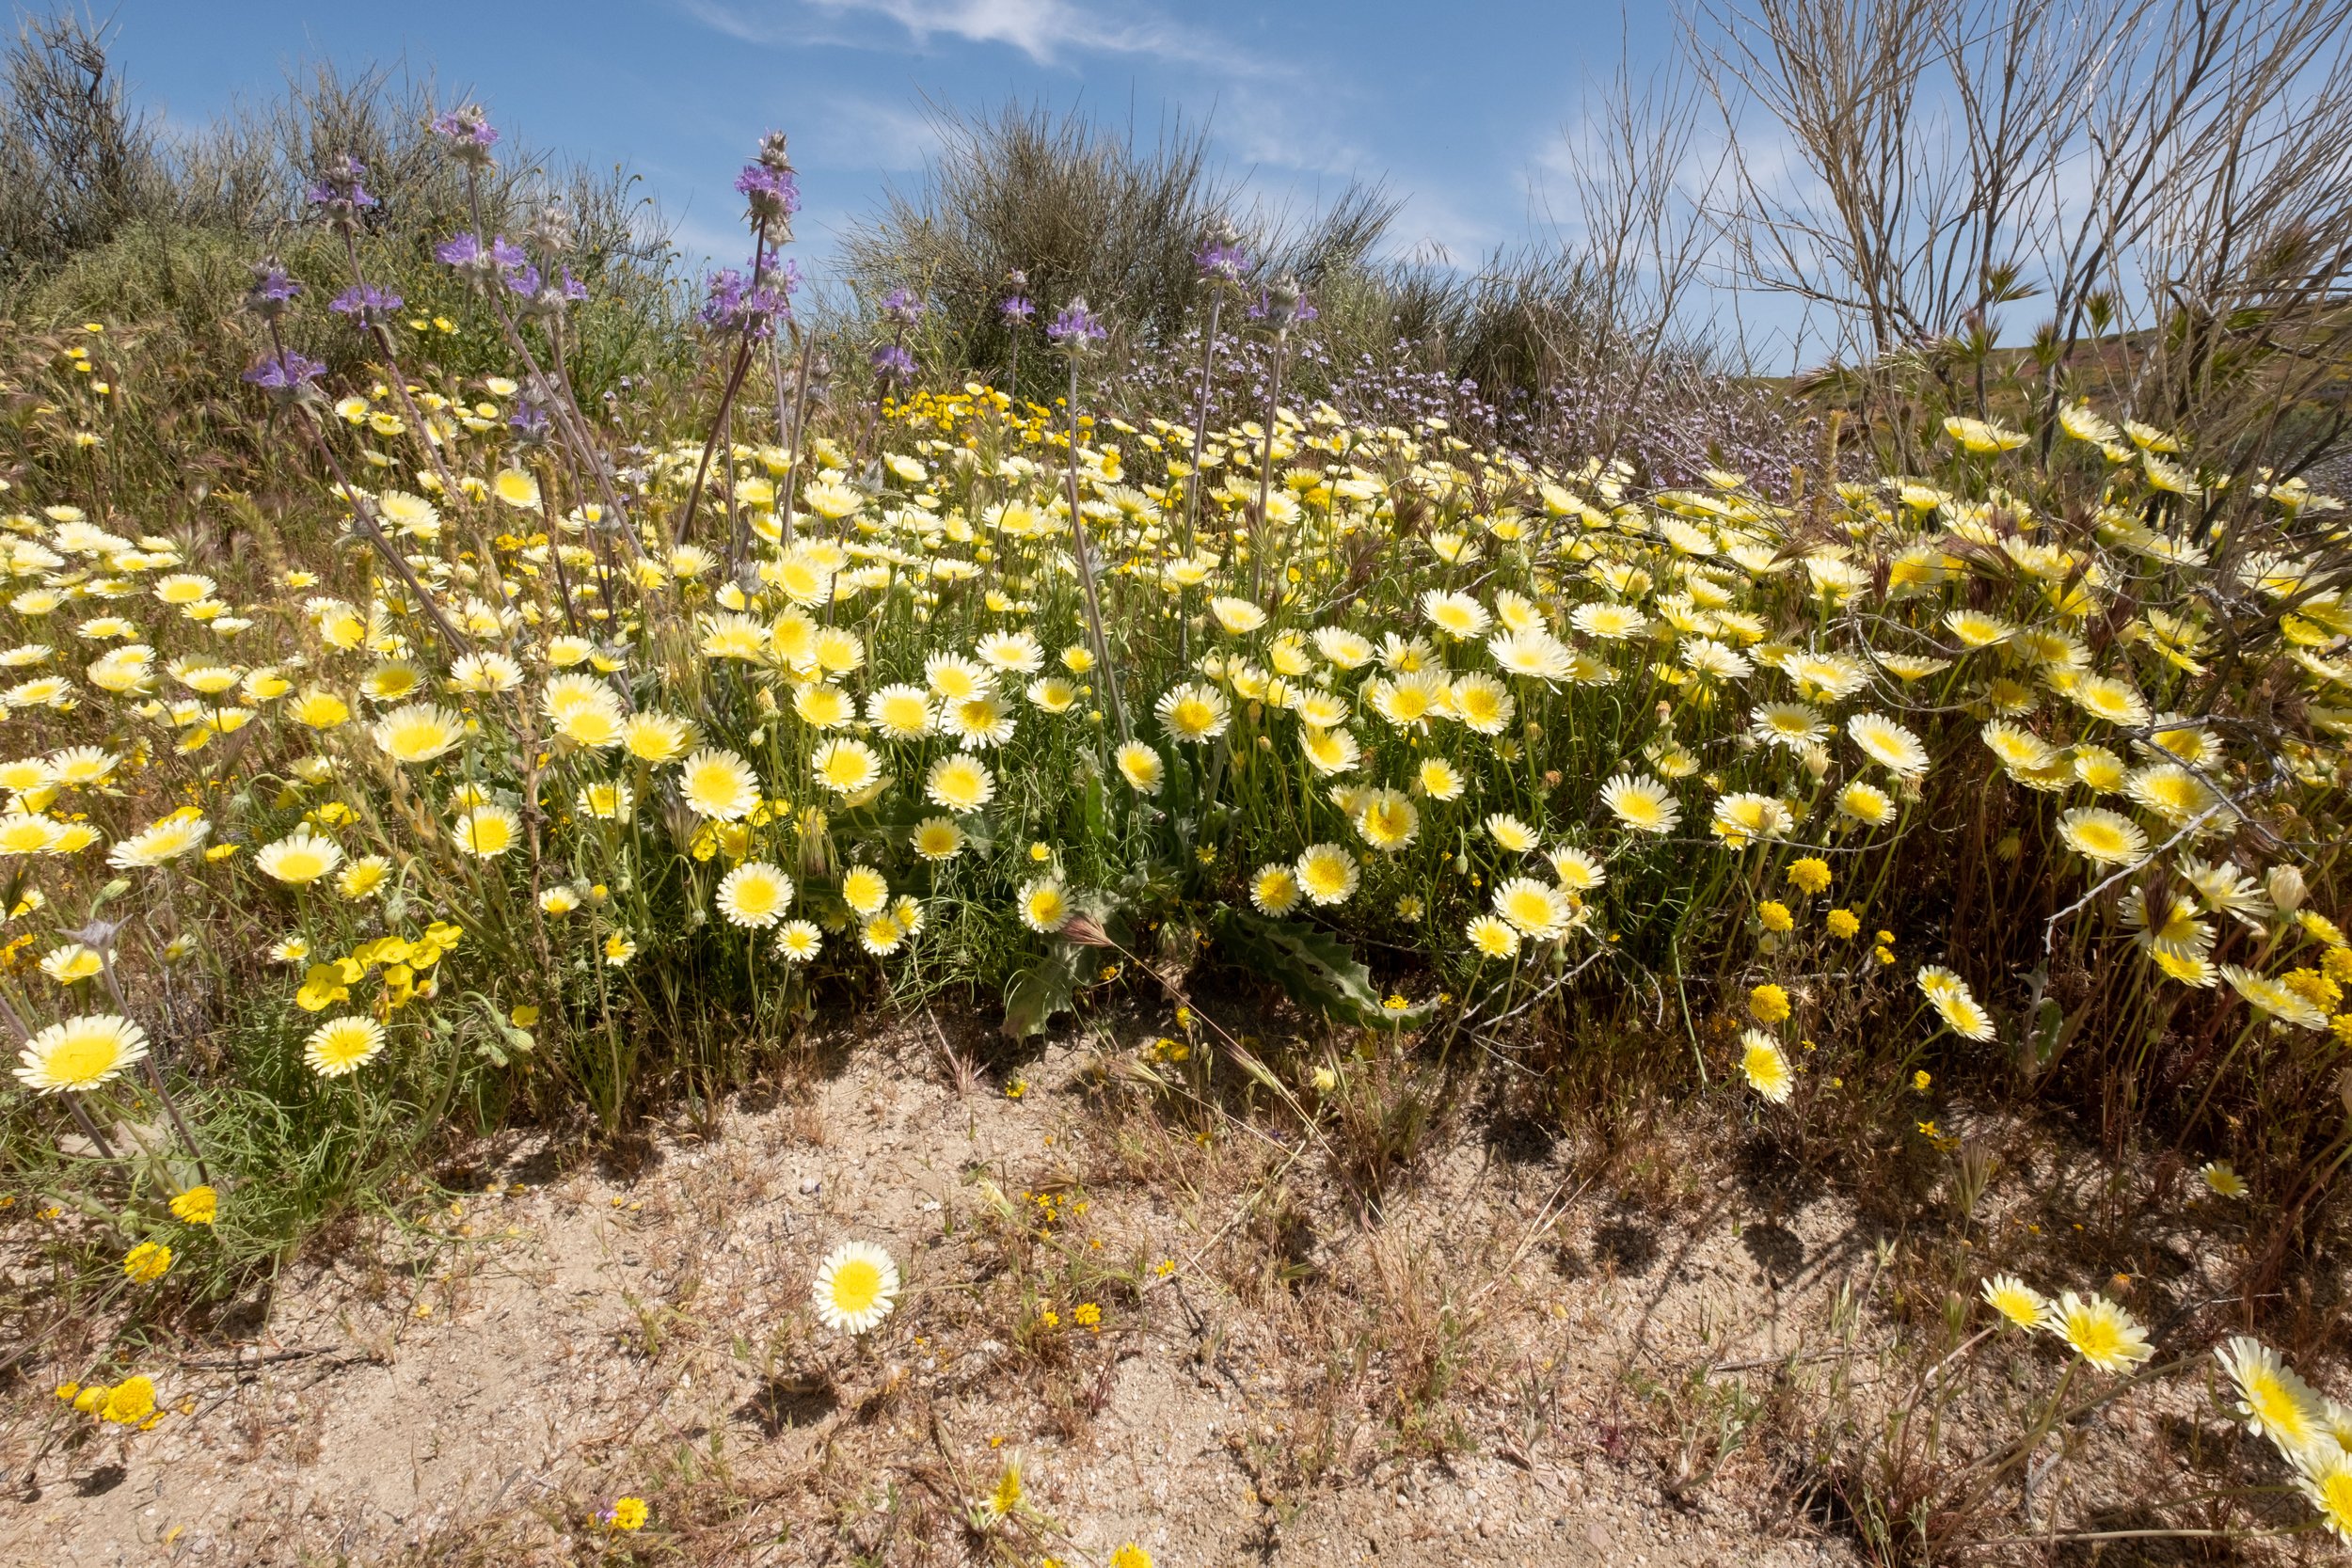  The wildflowers are blooming profusely in Carrizo Plain National Monument in Santa Margarita, Calif. on Monday, April 24th, 2023. Soda Lake Road runs through the middle and offers an easy way to see the views. (Akemi Rico | The Corsair) 